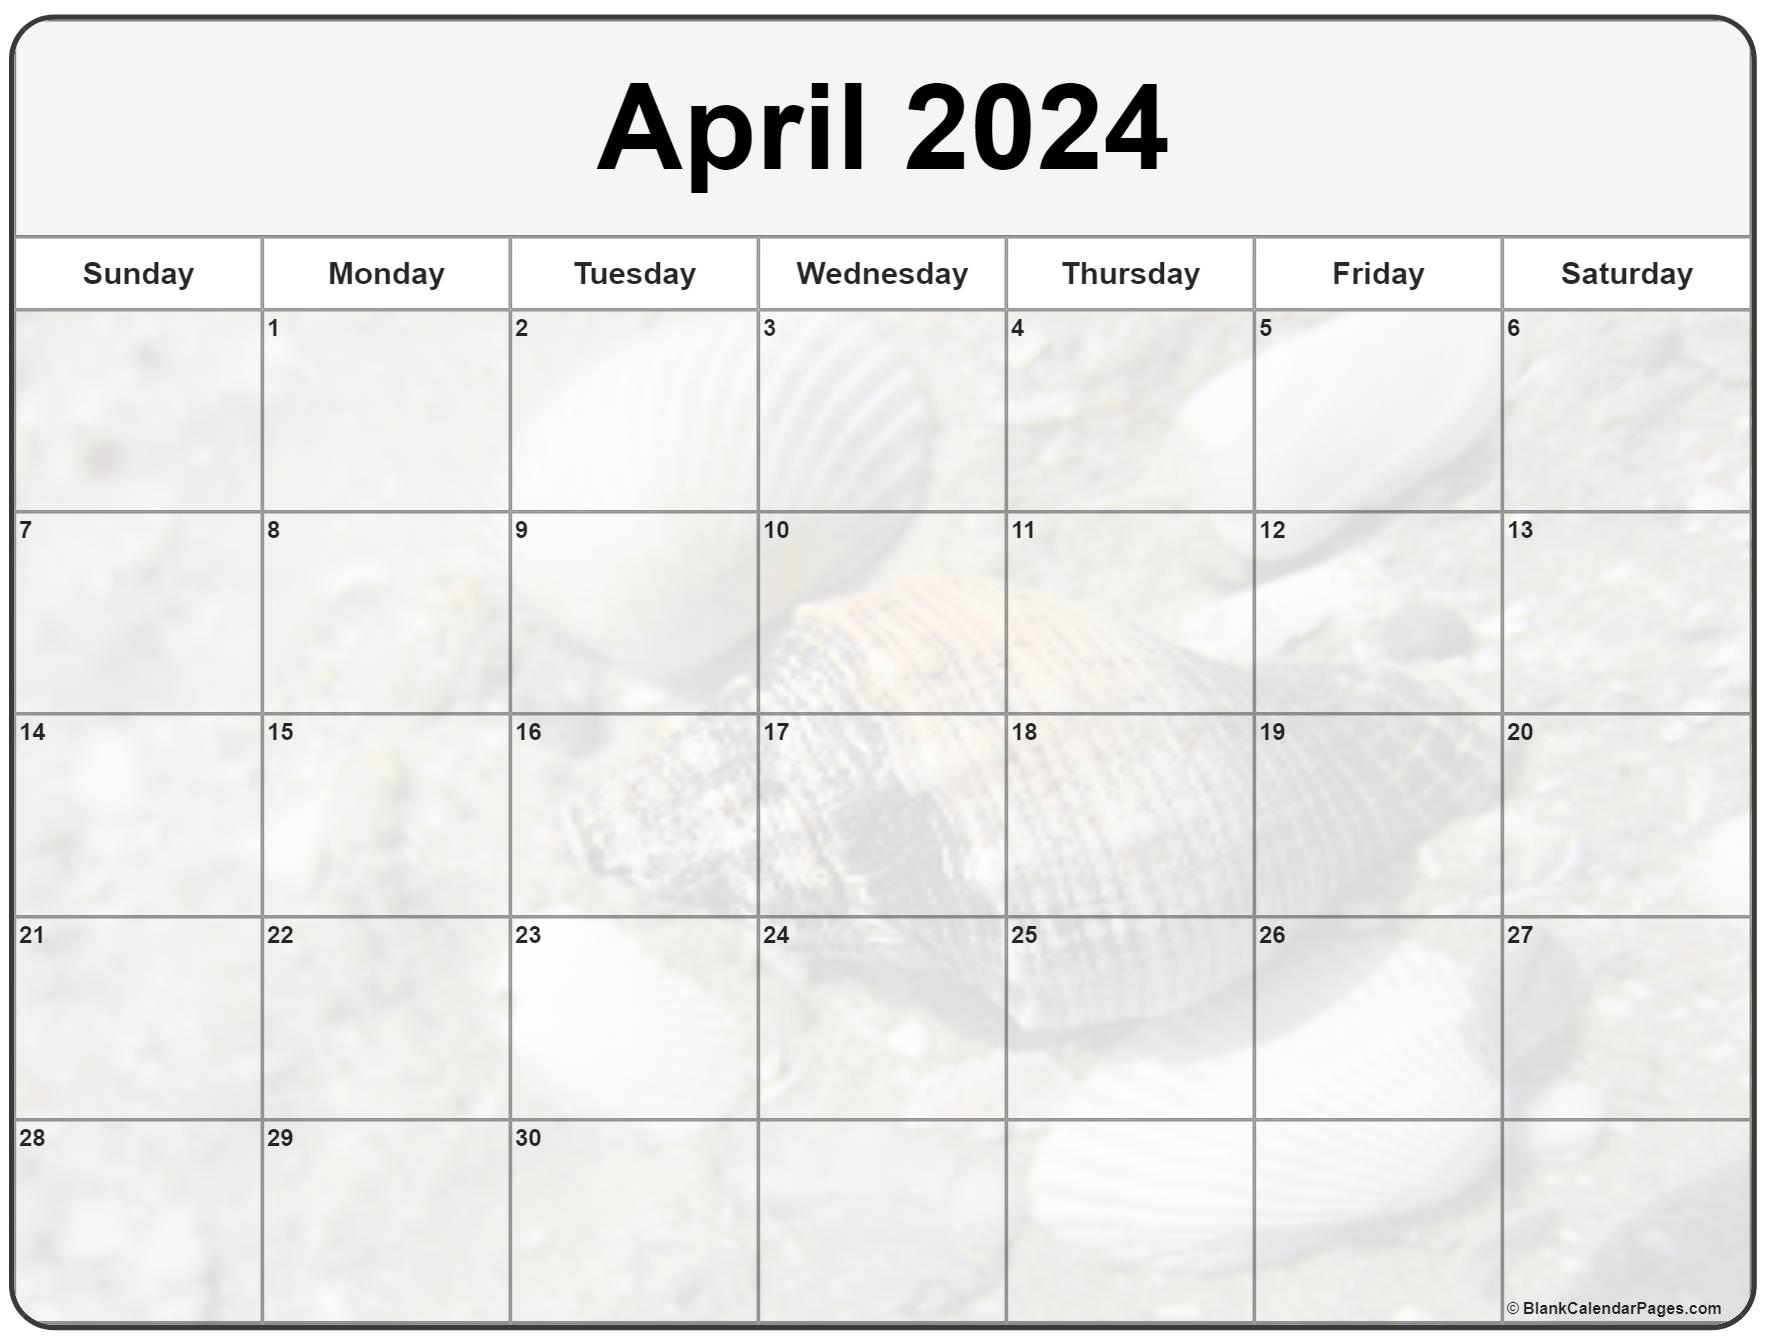 collection-of-april-2023-photo-calendars-with-image-filters